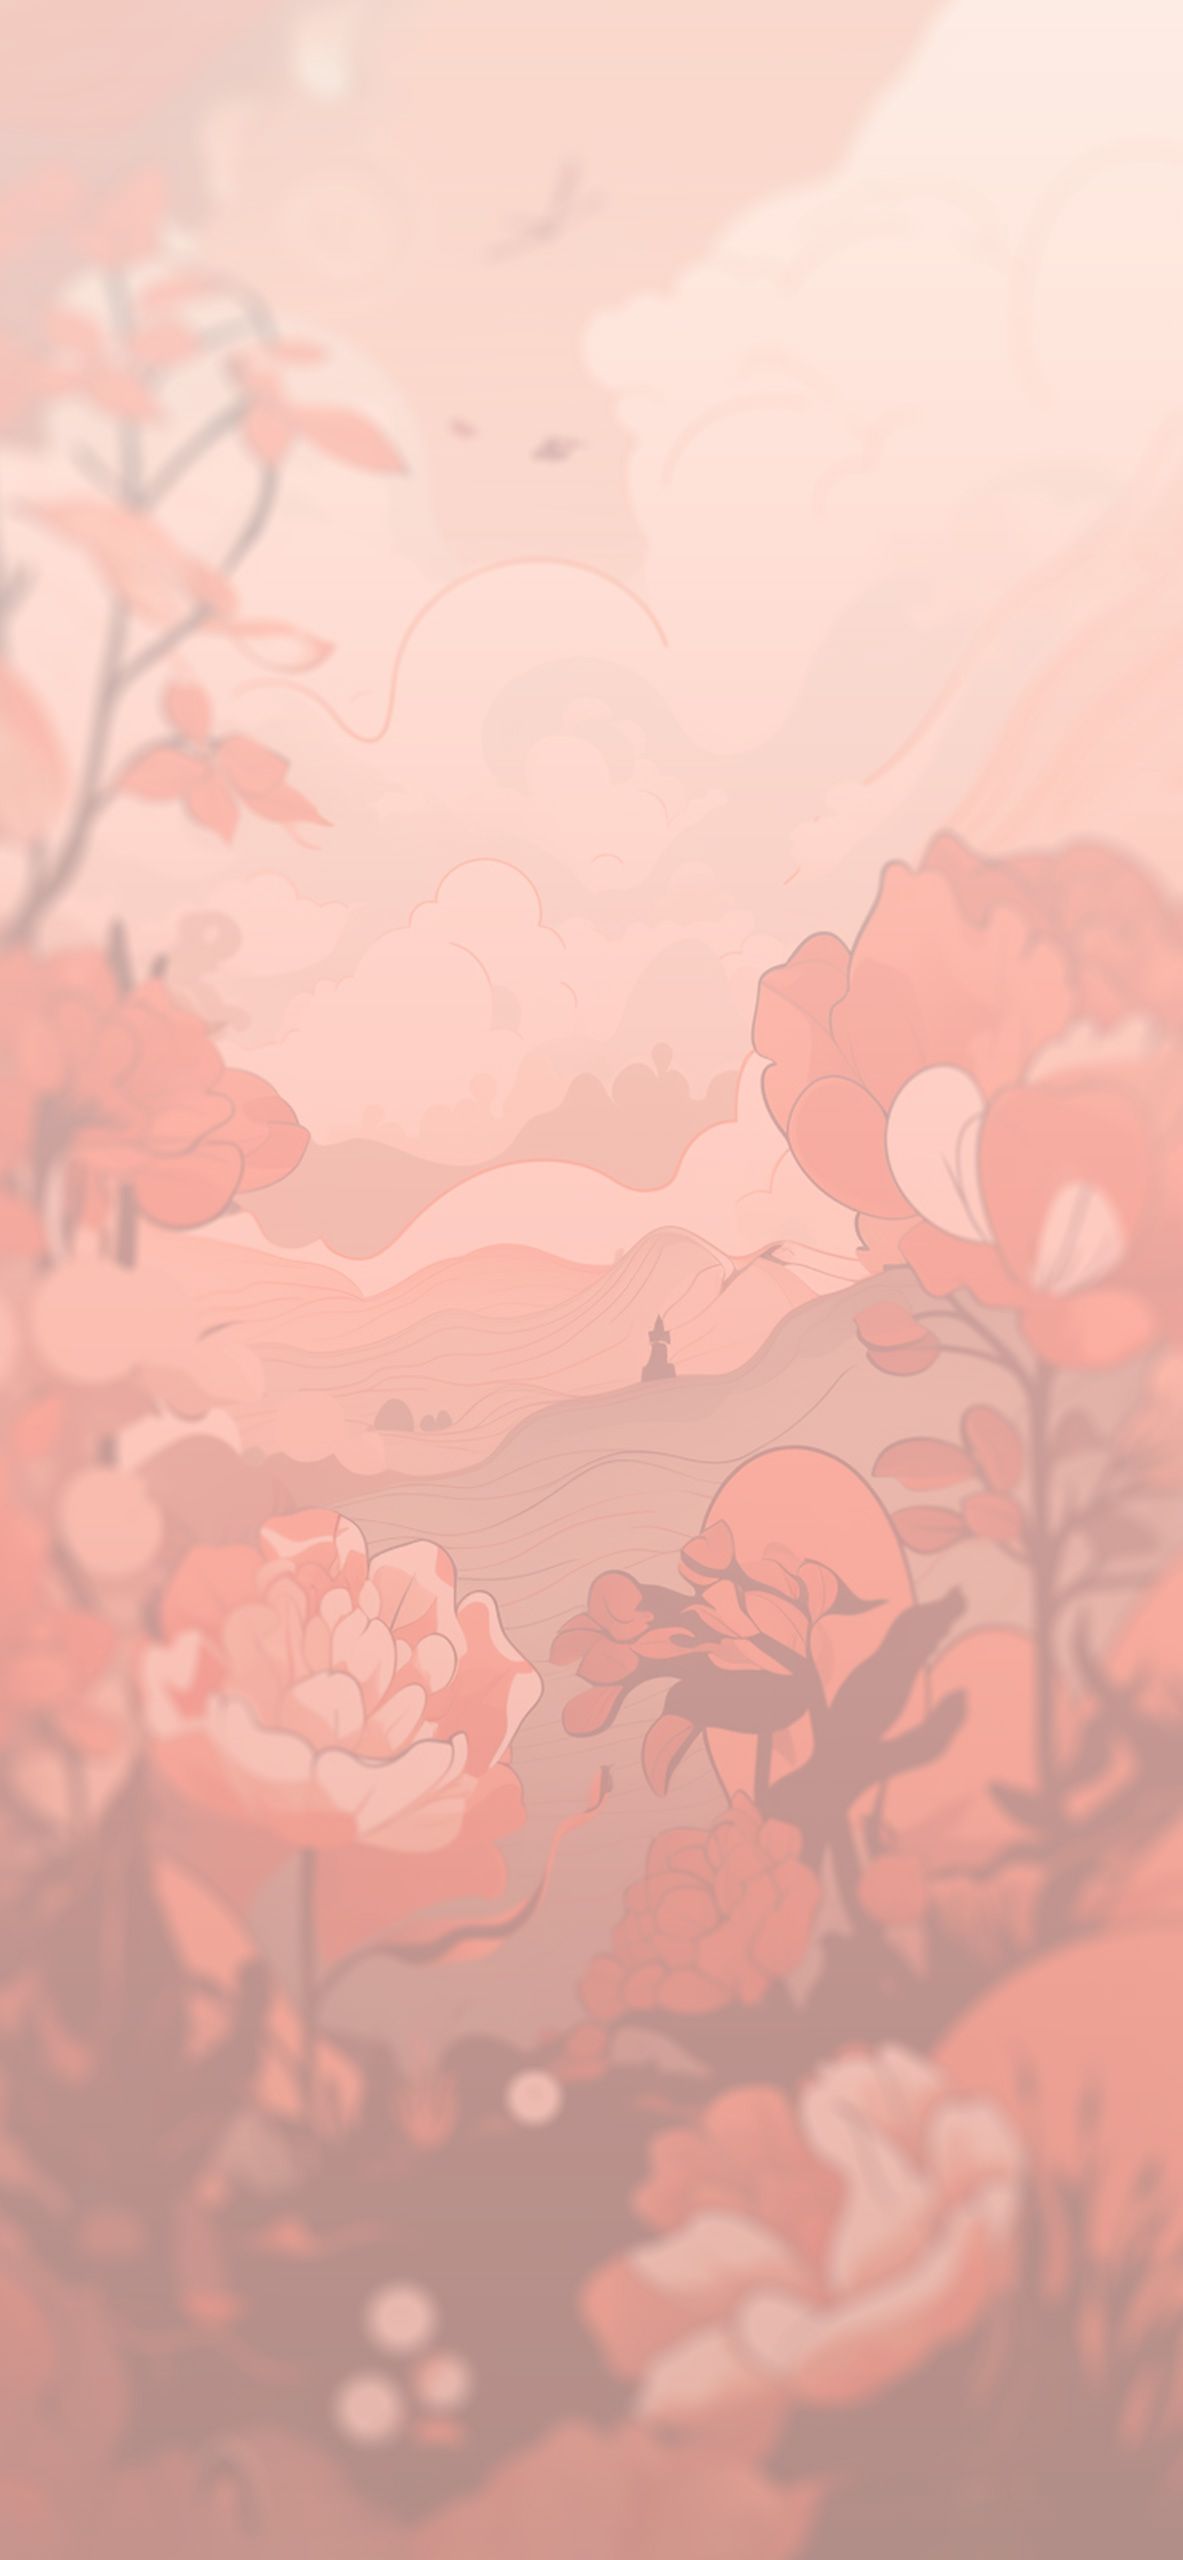 Red Flowers & Clouds Aesthetic Wallpaper